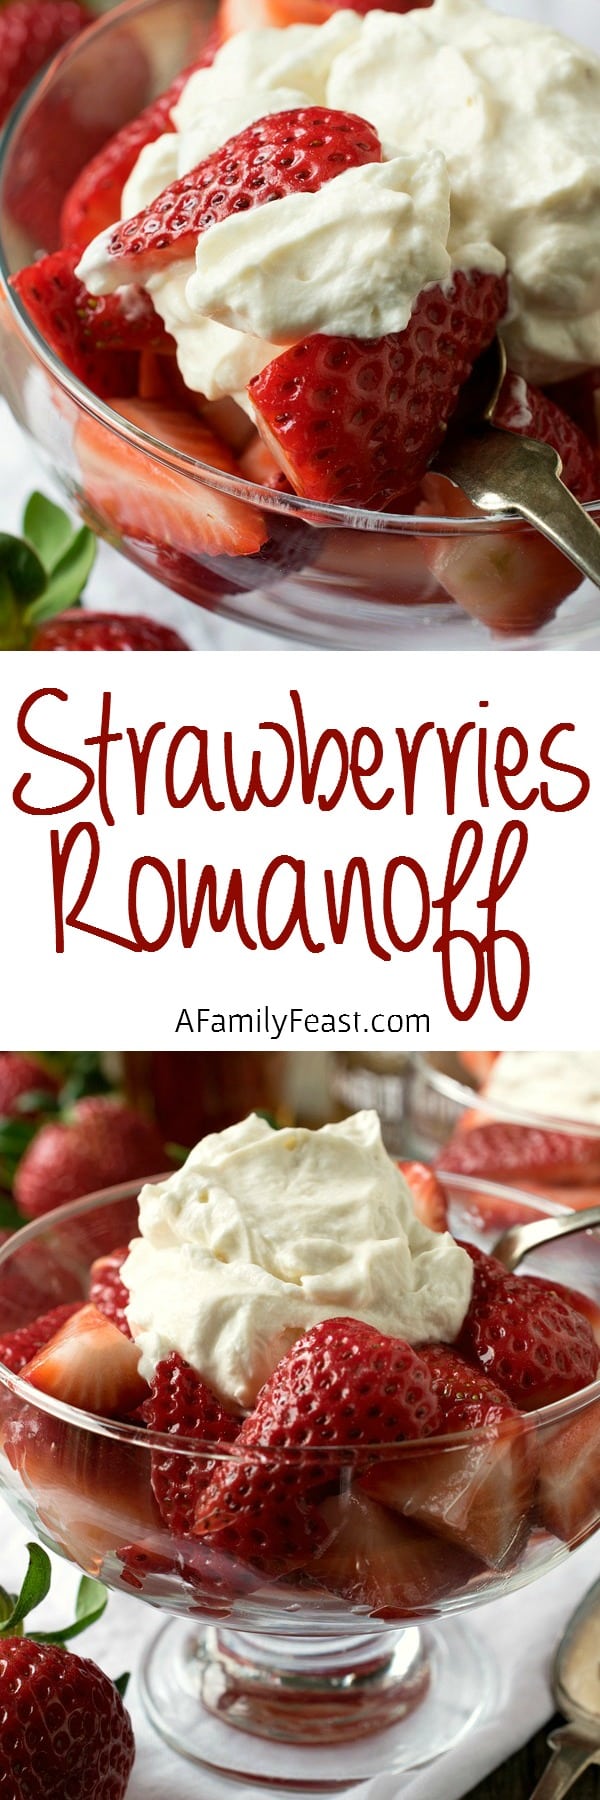 Strawberries Romanoff - A must-try, luxuriously delicious dessert of fresh strawberries, whipped cream and sour cream that have been flavored with liqueur. 